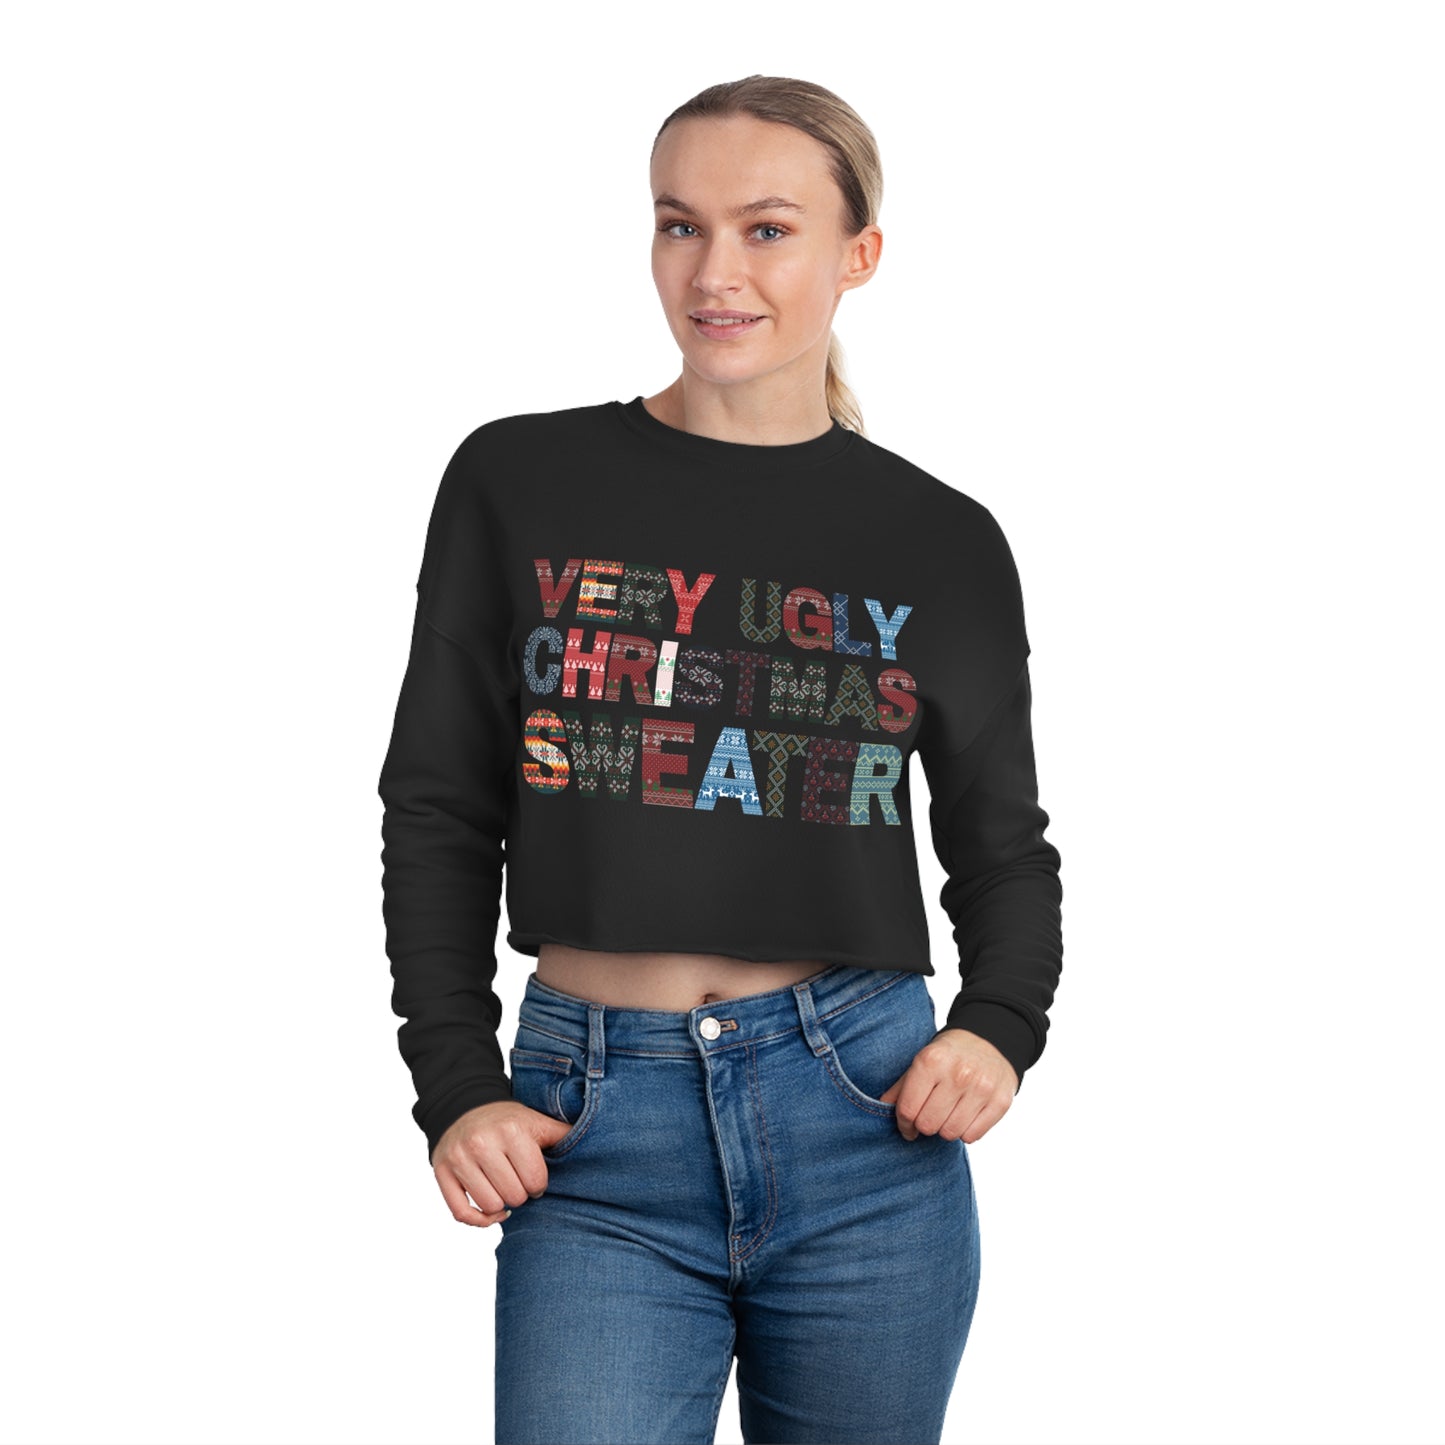 Women's Cropped Very Ugly Christmas Sweater